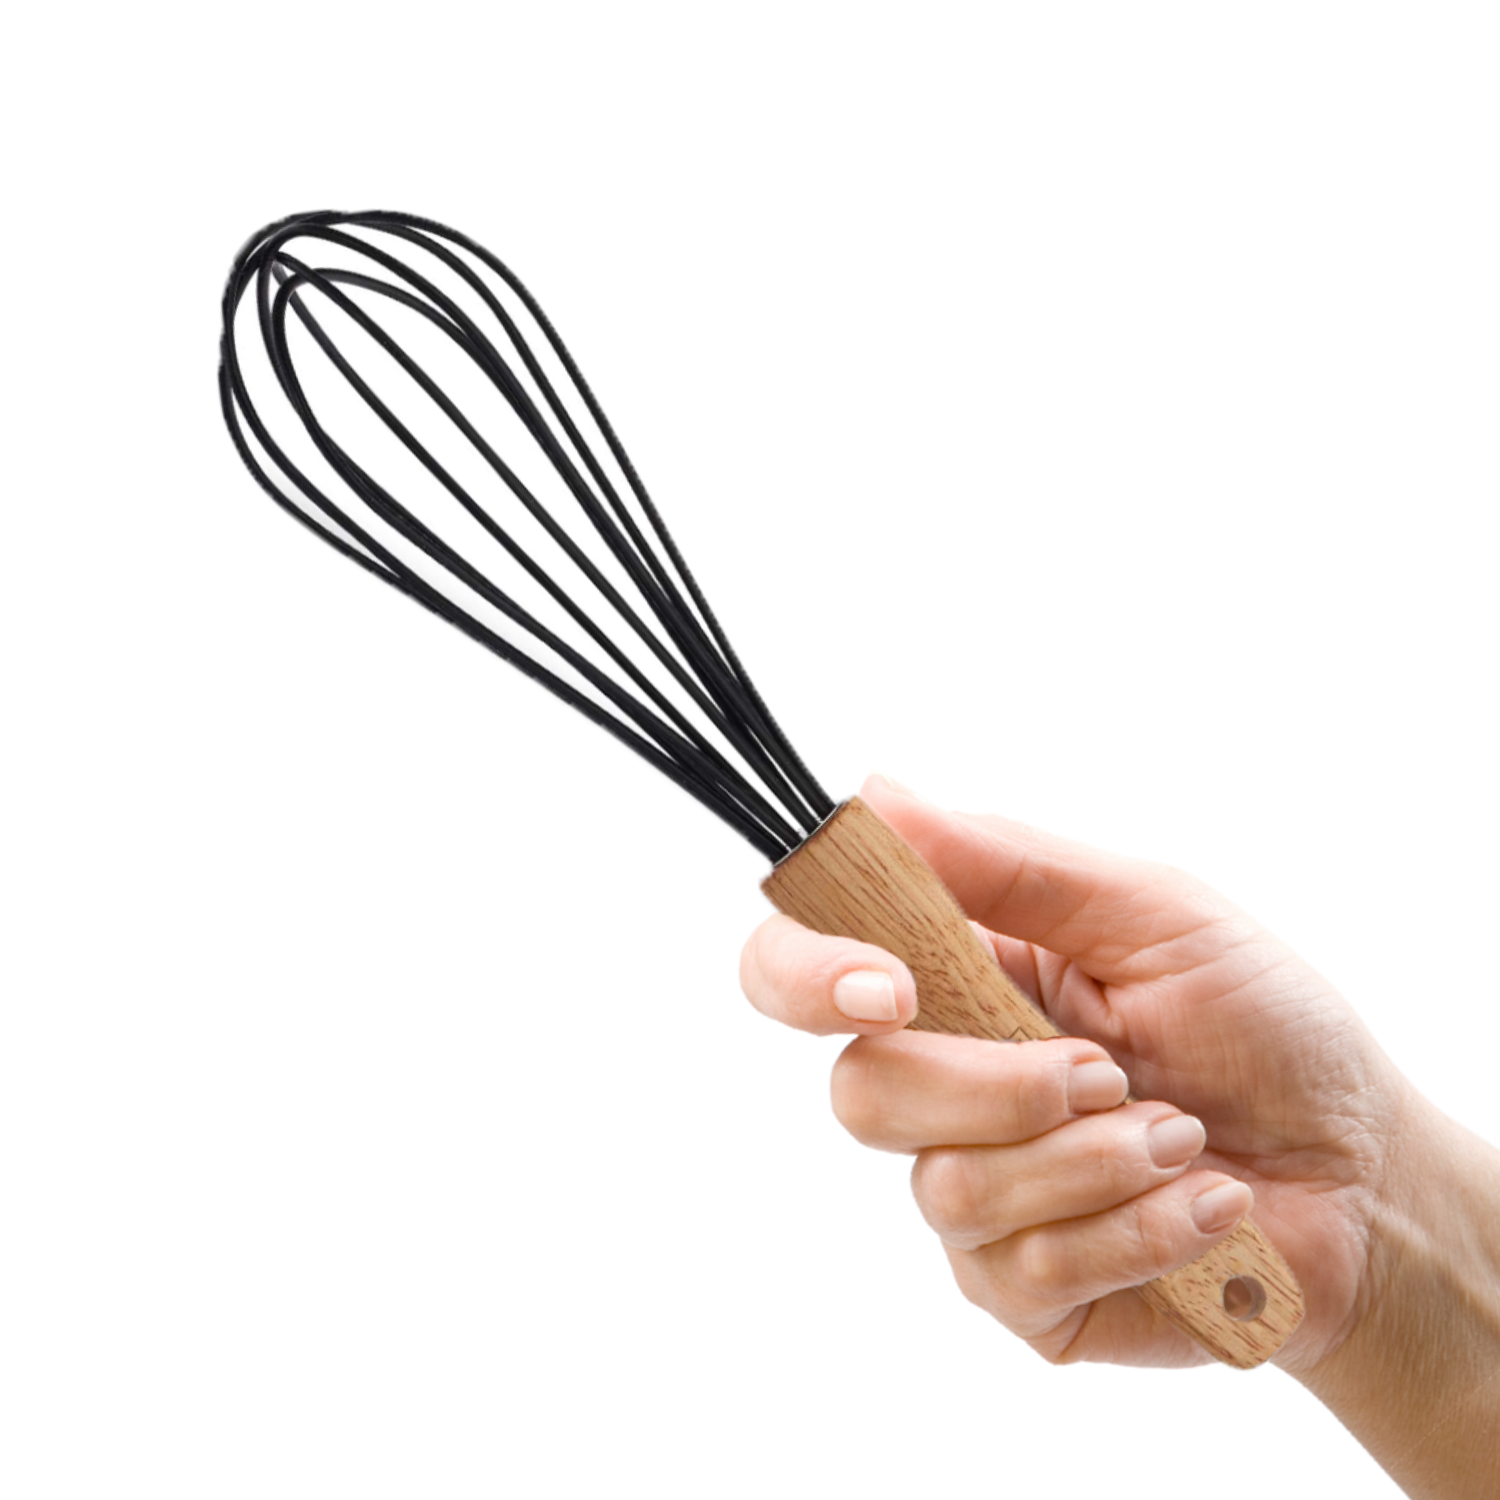 husMait 10' Silicone Whisk with Wood Handle - Superior Kitchen Whisk for Whisking Dough Egg and Other Foods